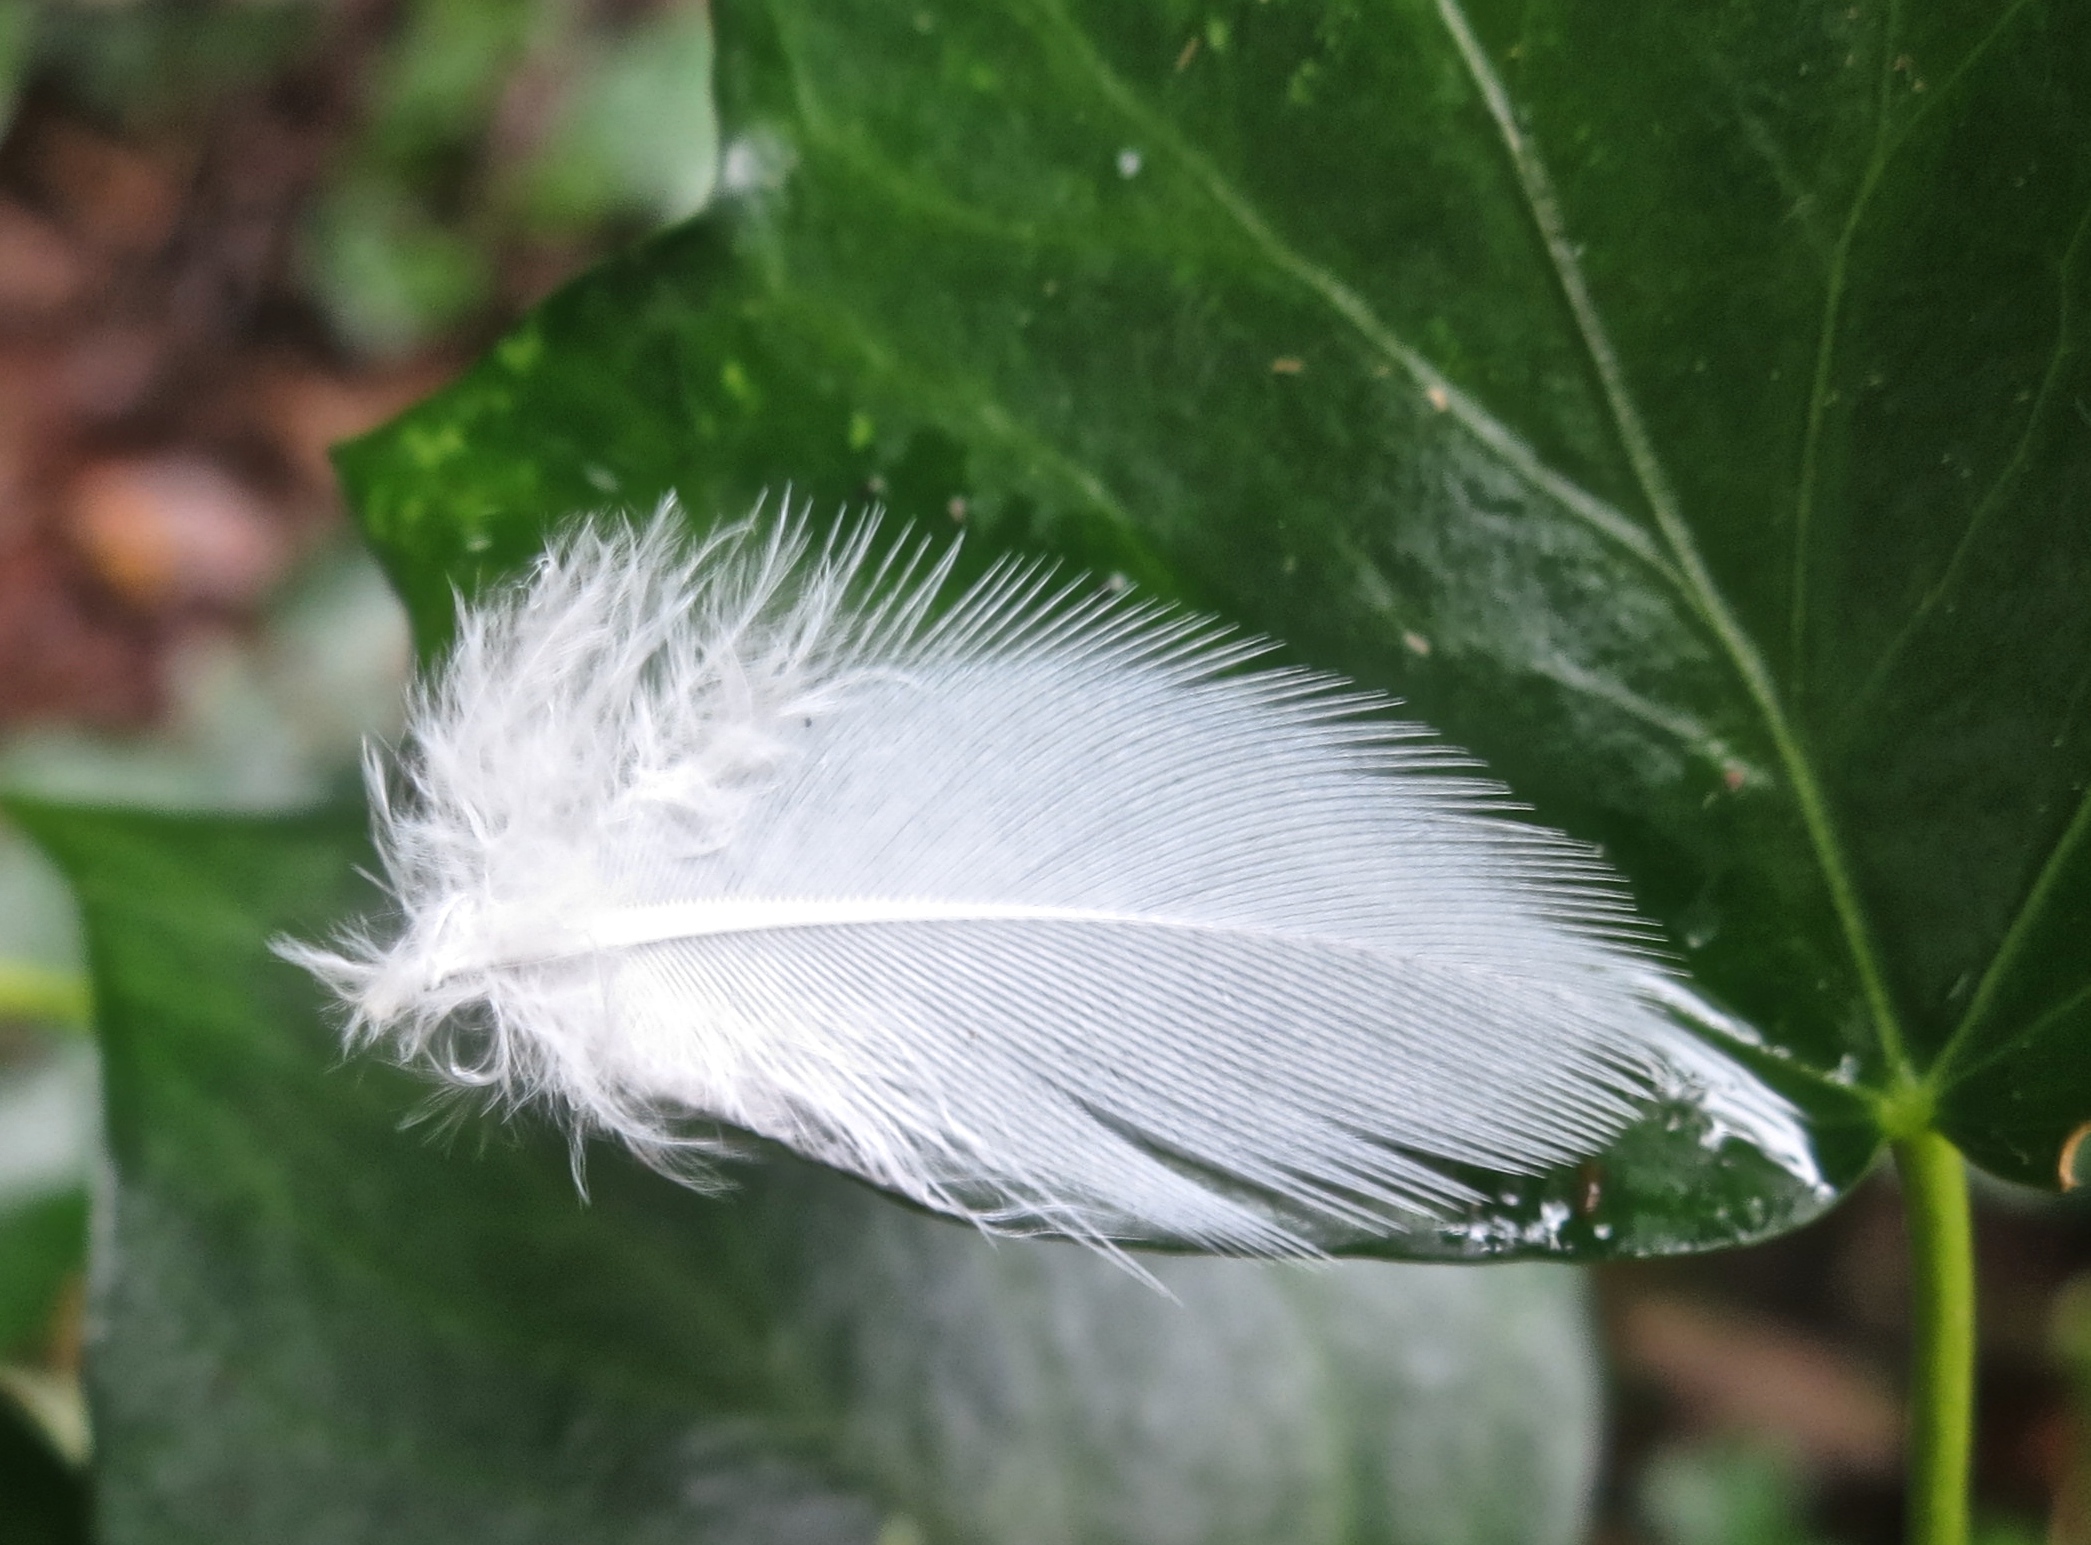 The White Feathers – derrickjknight